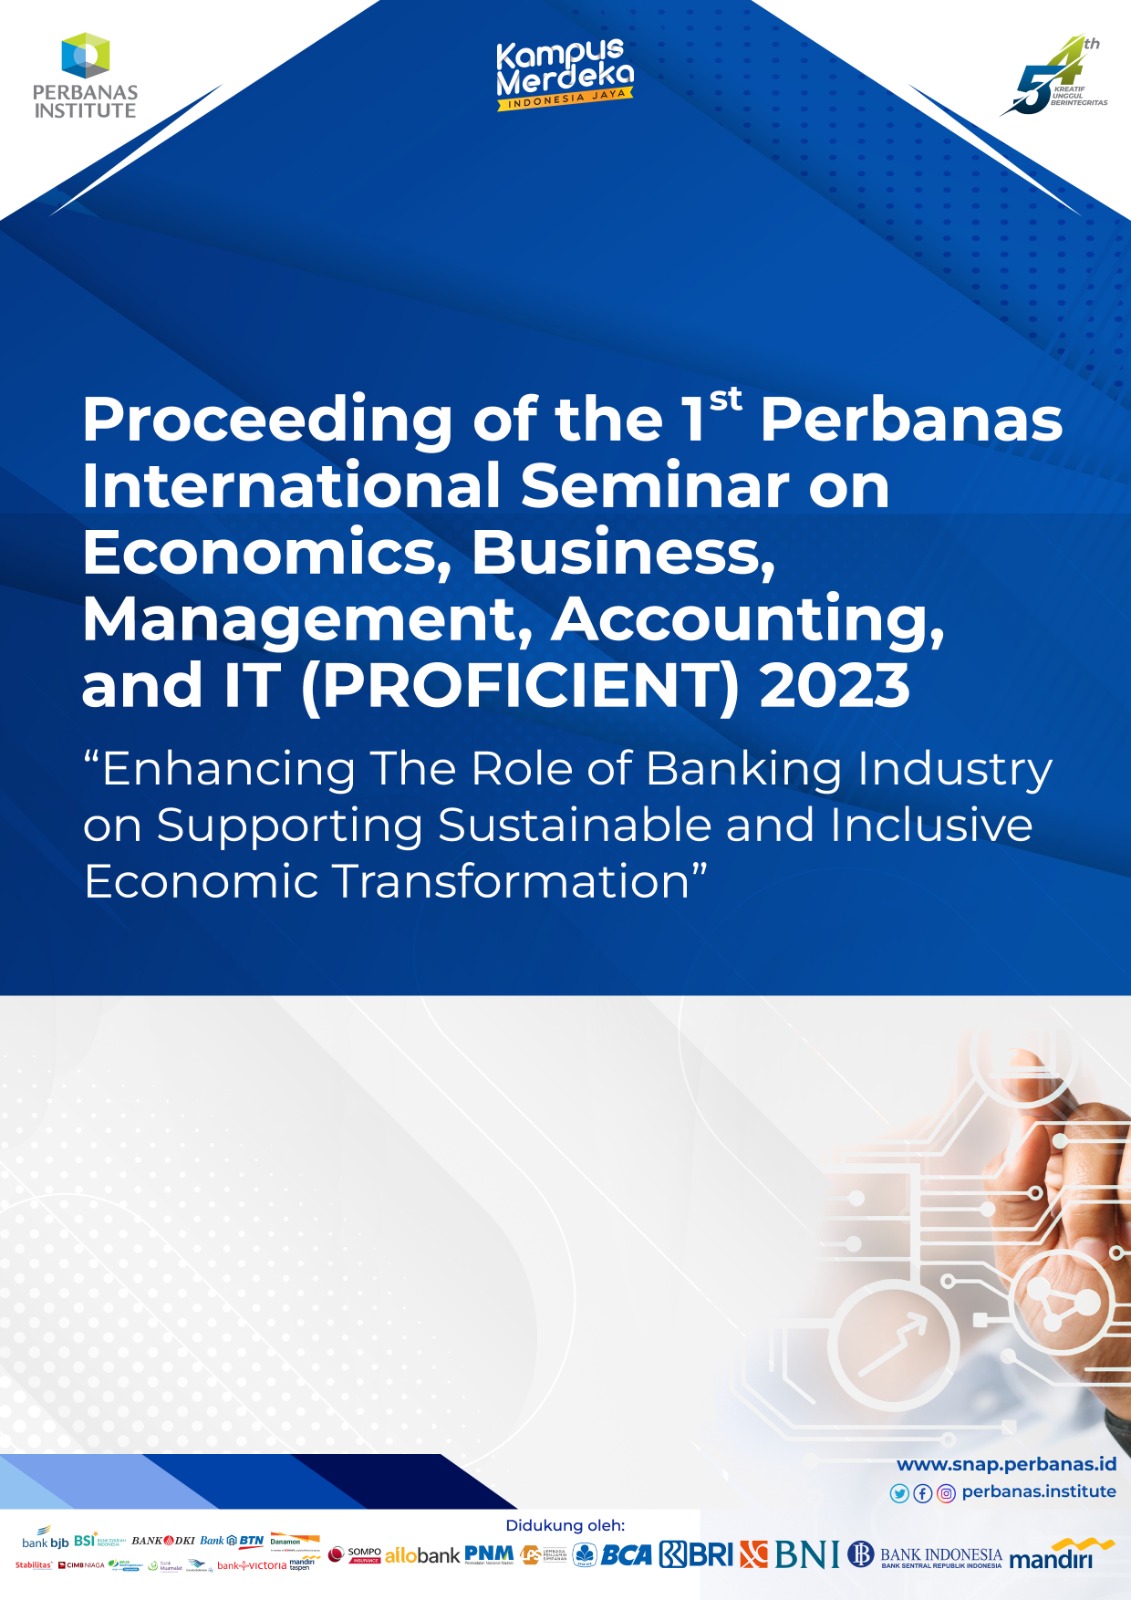 					View Vol. 1 No. 1 (2023): Proceedings of the Perbanas International Seminar on Economics, Business, Management, Accounting and IT (PROFICIENT) 
				